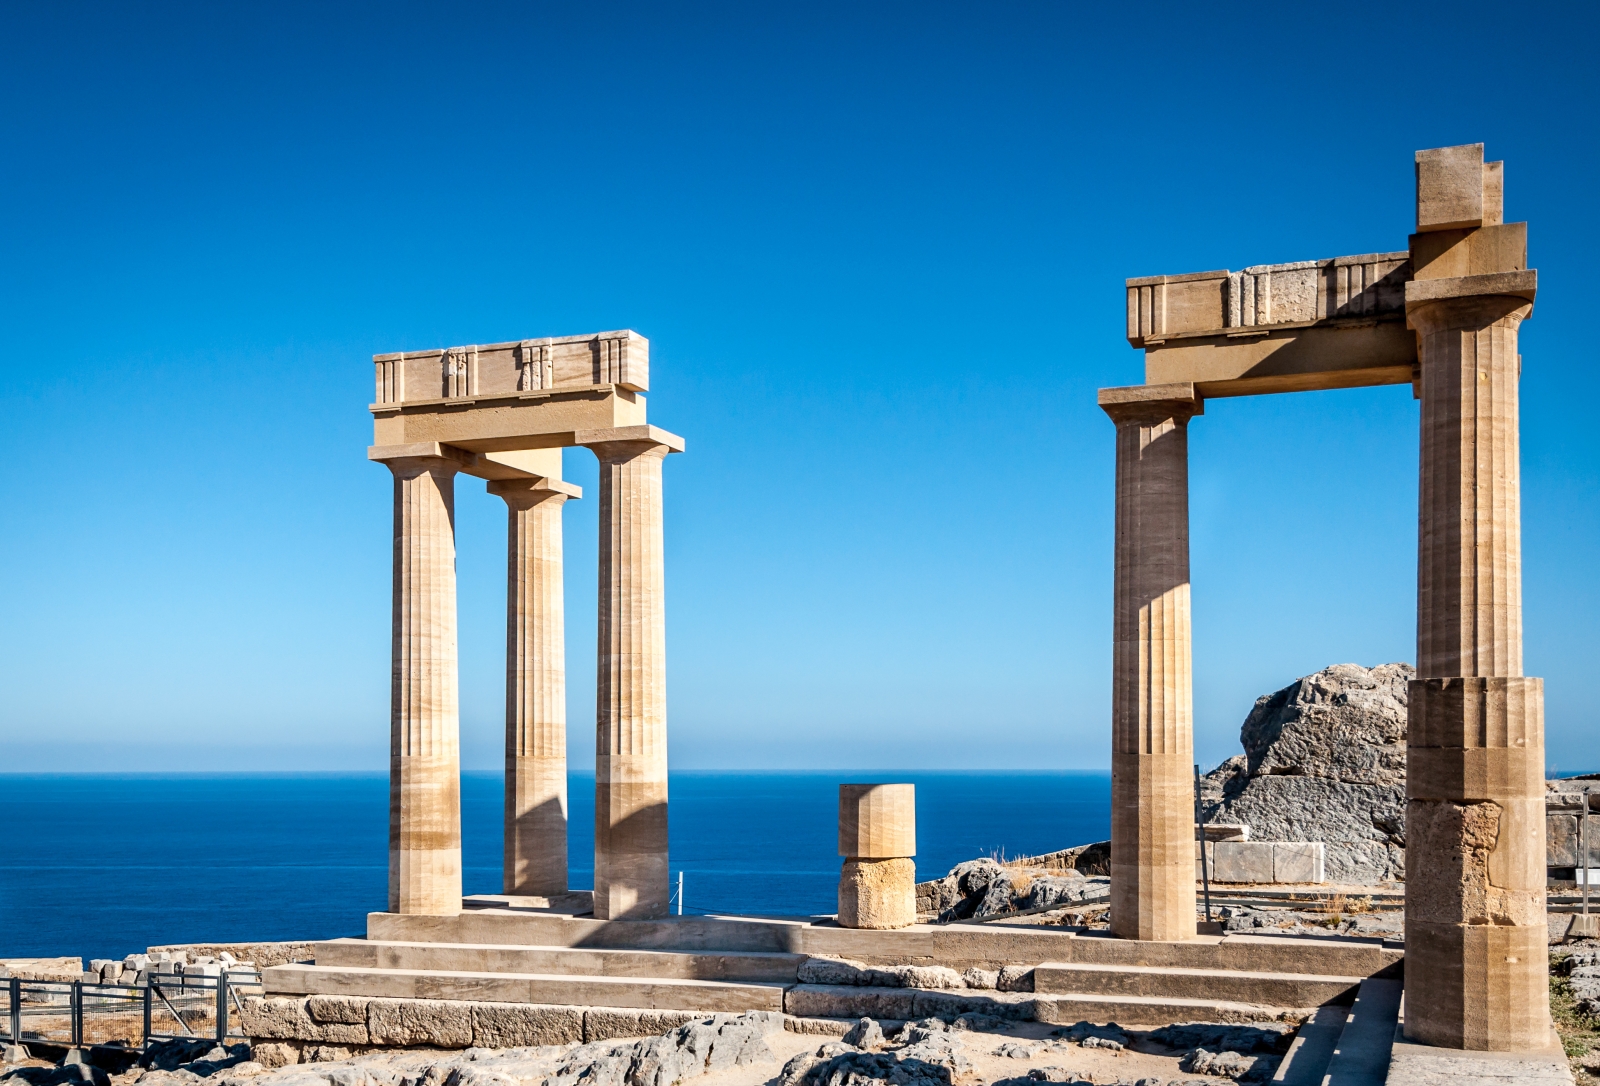 Two sets of columns on a island with the view of the sea